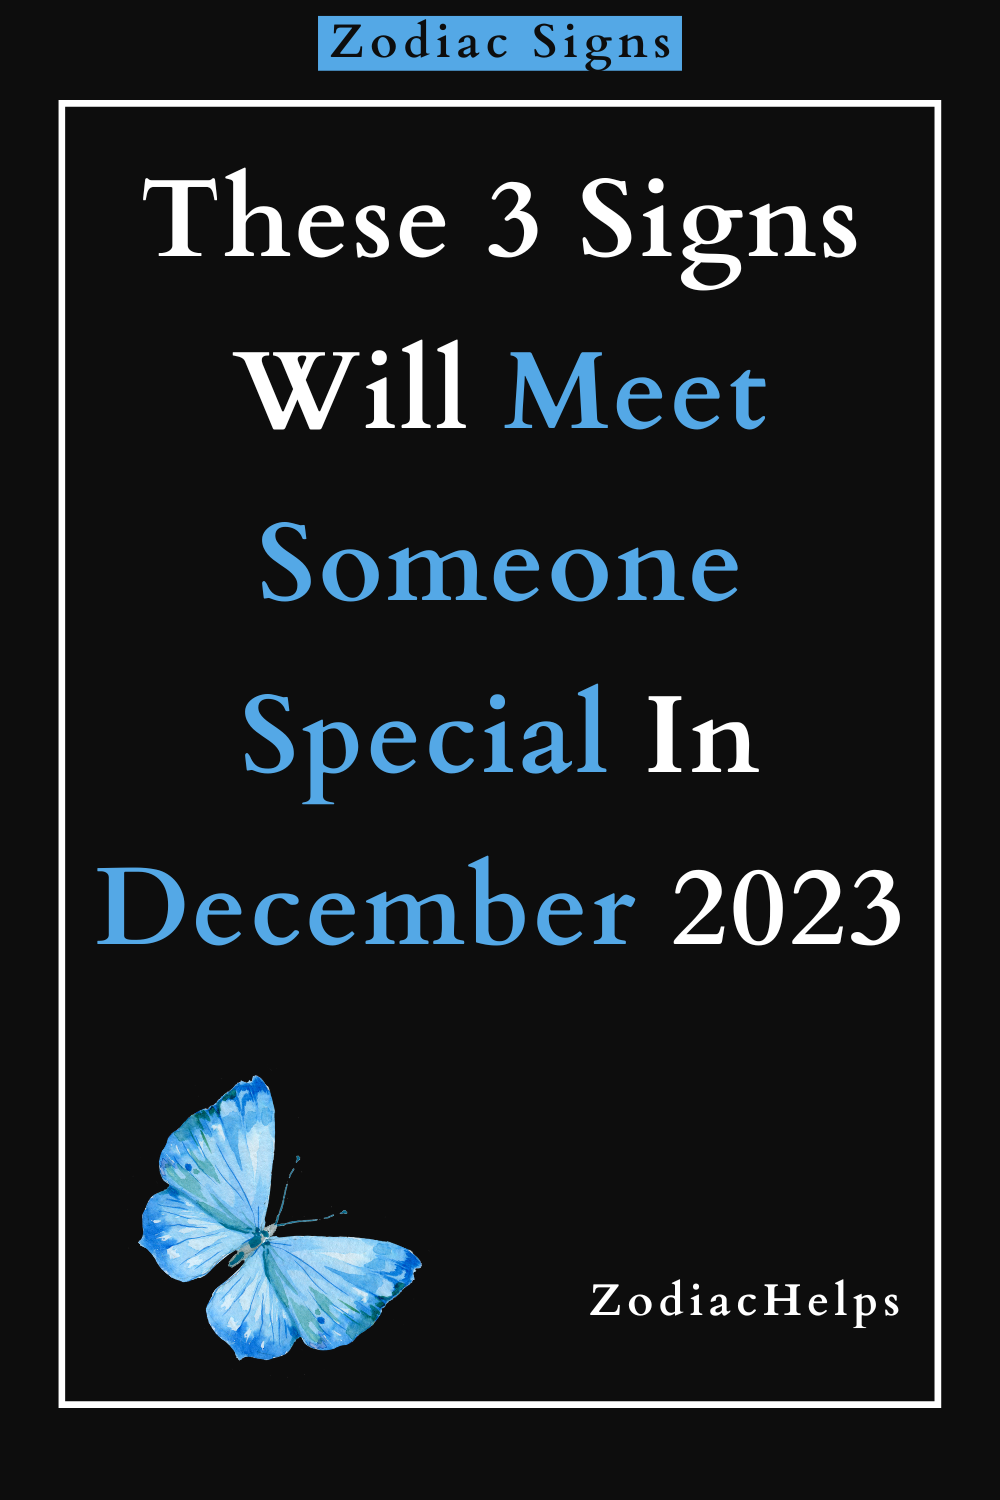 These 3 Signs Will Meet Someone Special In December 2023